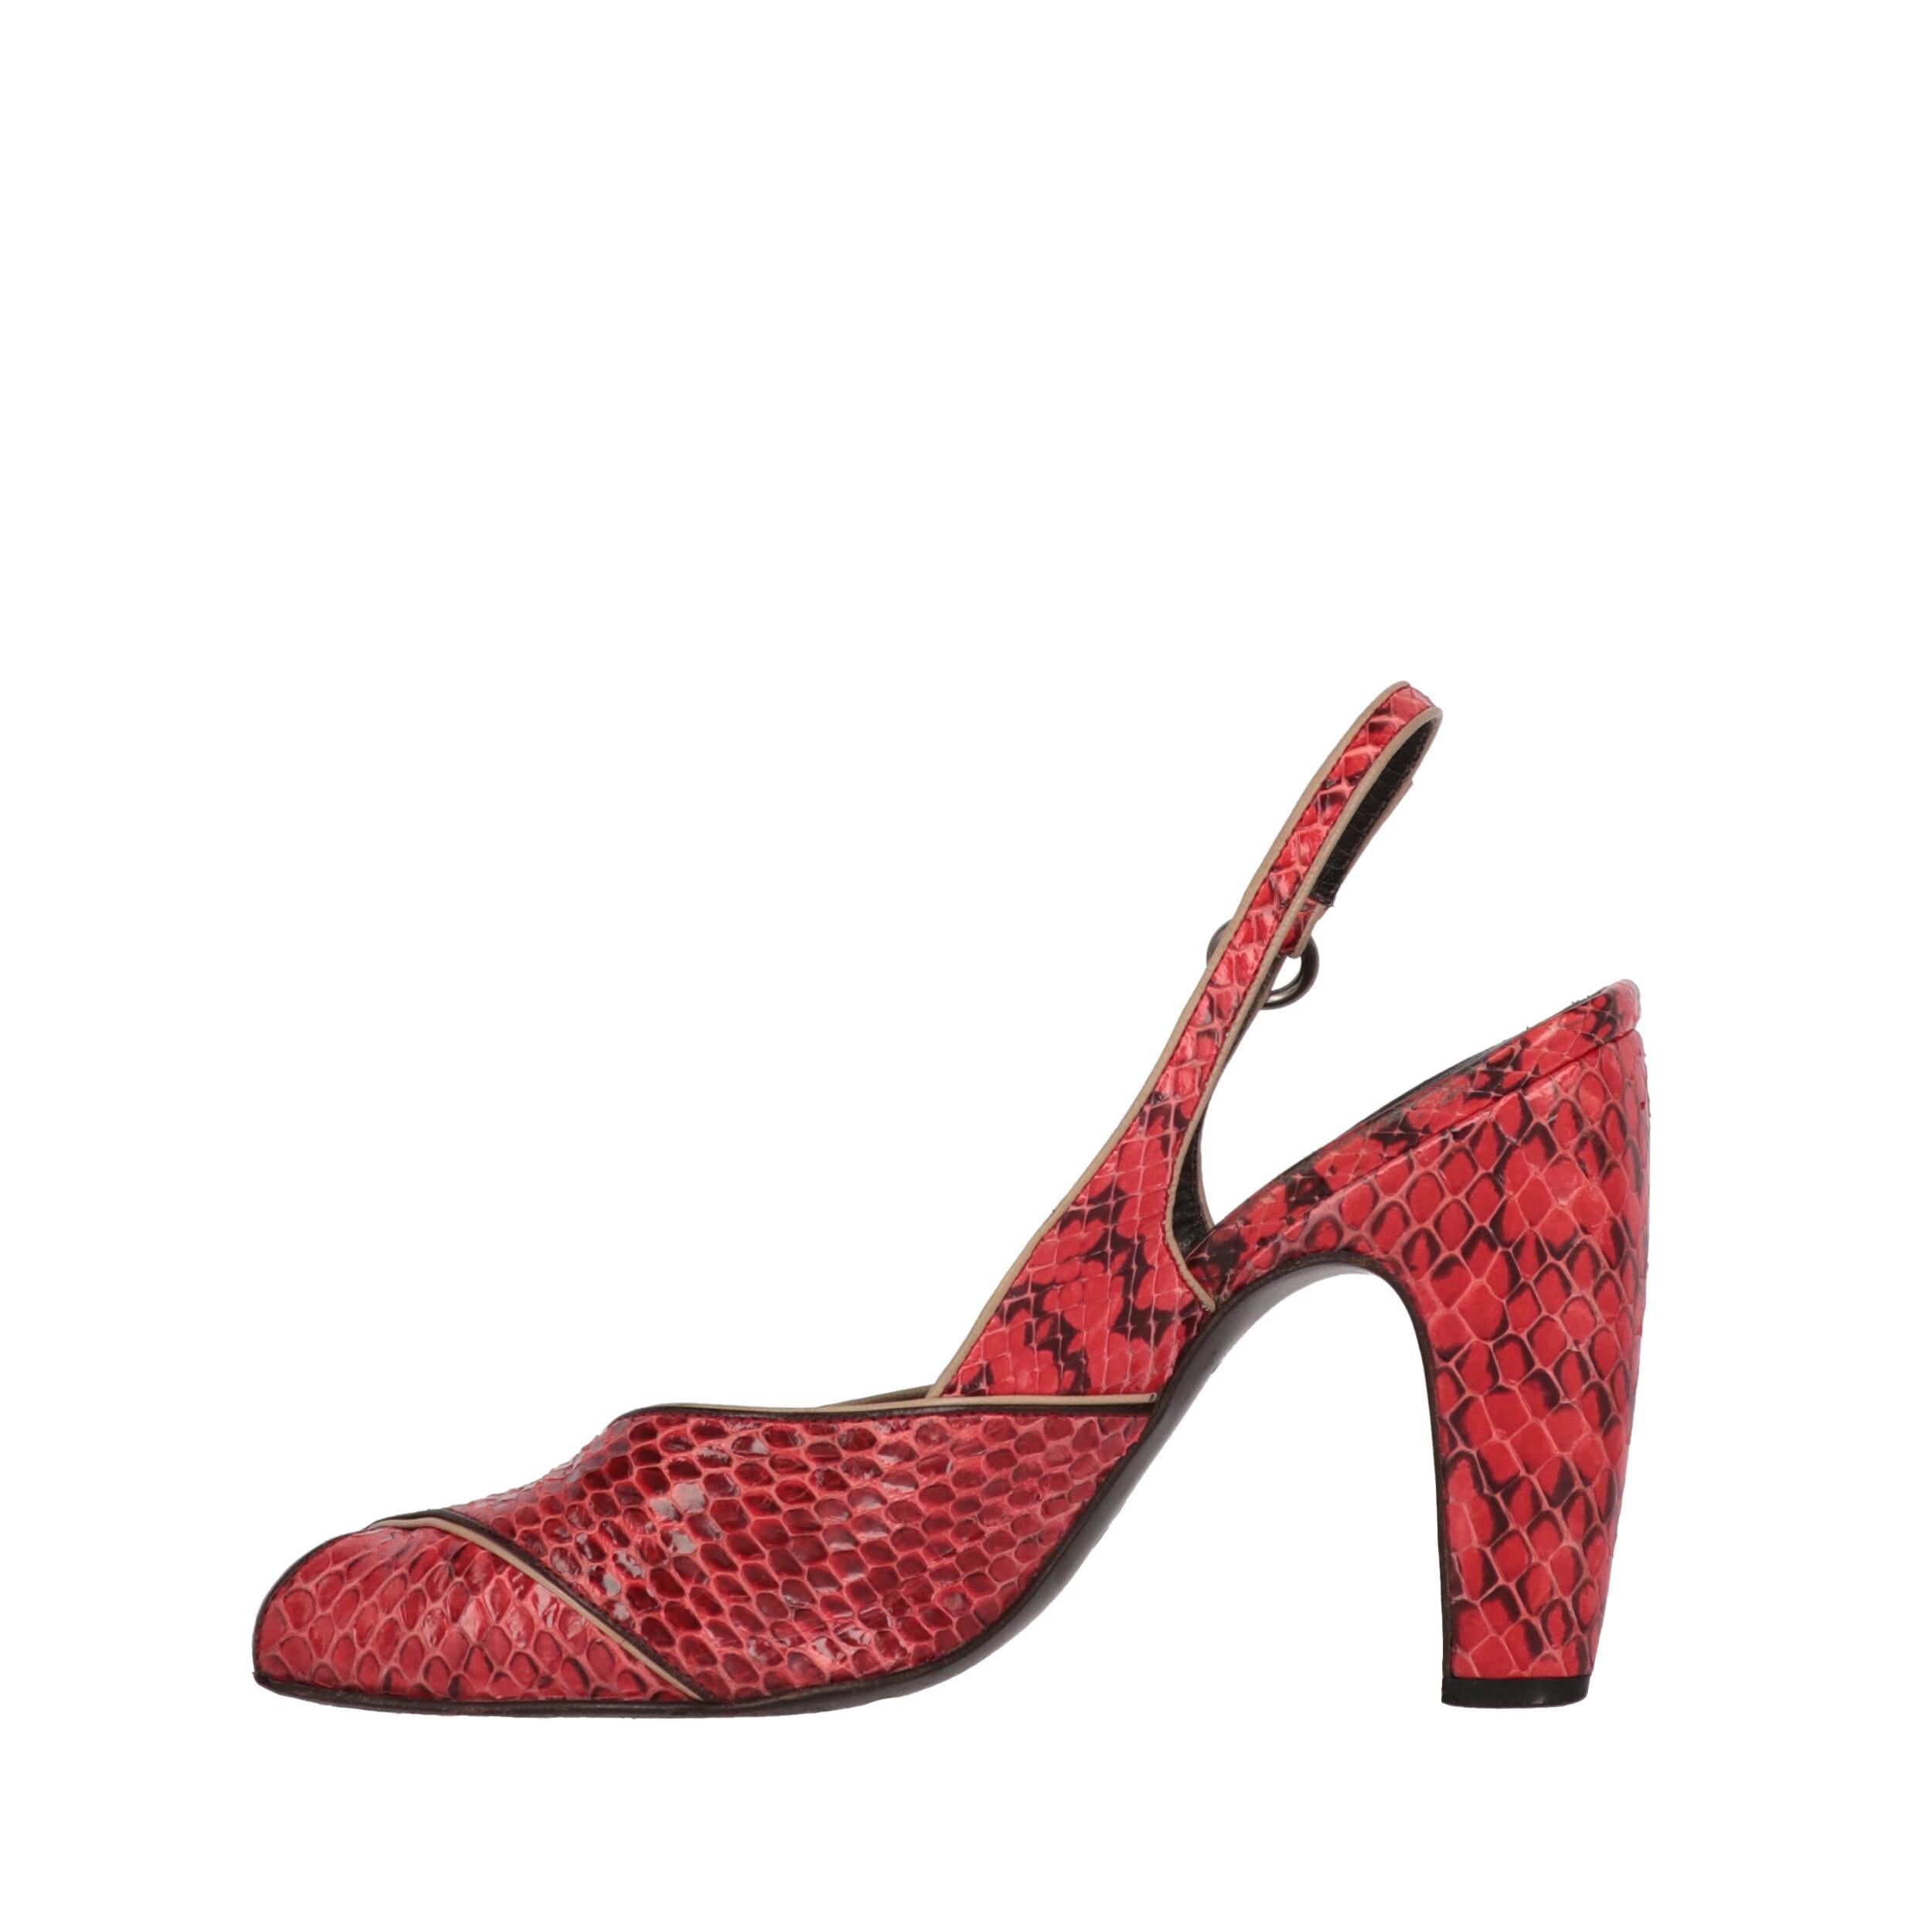 Miu Miu red and black python leather sligback shoes. Open toe model and thick heel.

The product shows slight traces of use as shown in the pictures.

Years: 2000s

Made in Italy

Size: 38 EU

Heels: 11 cm
Insole length: 24,5 cm  